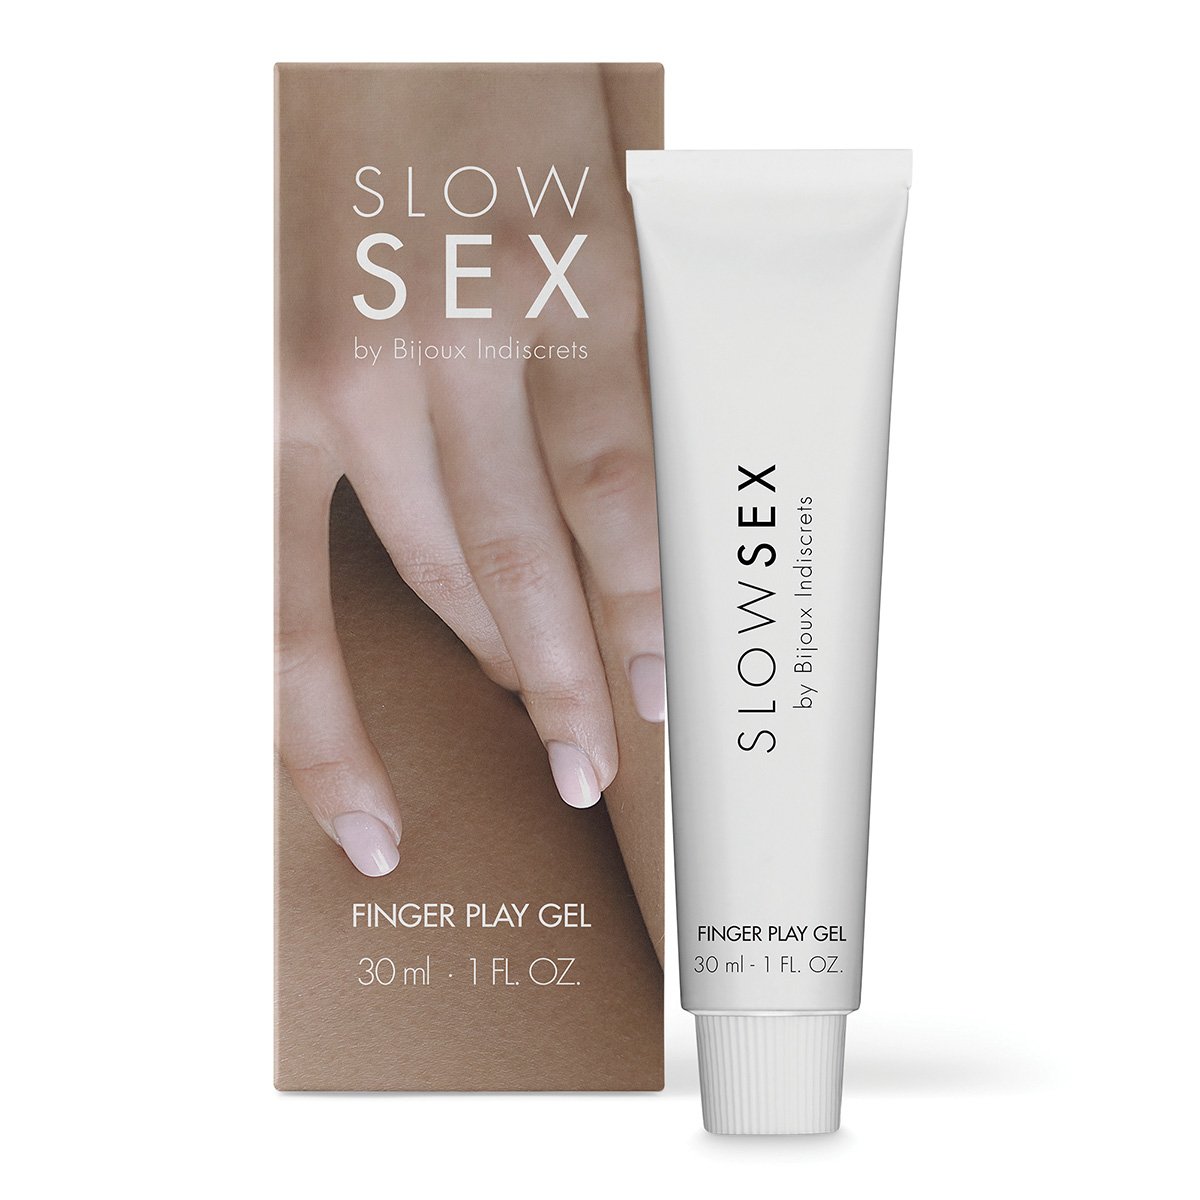 Bijoux Indiscrets Slow Sex Finger Play Gel 1oz - Buy At Luxury Toy X - Free 3-Day Shipping